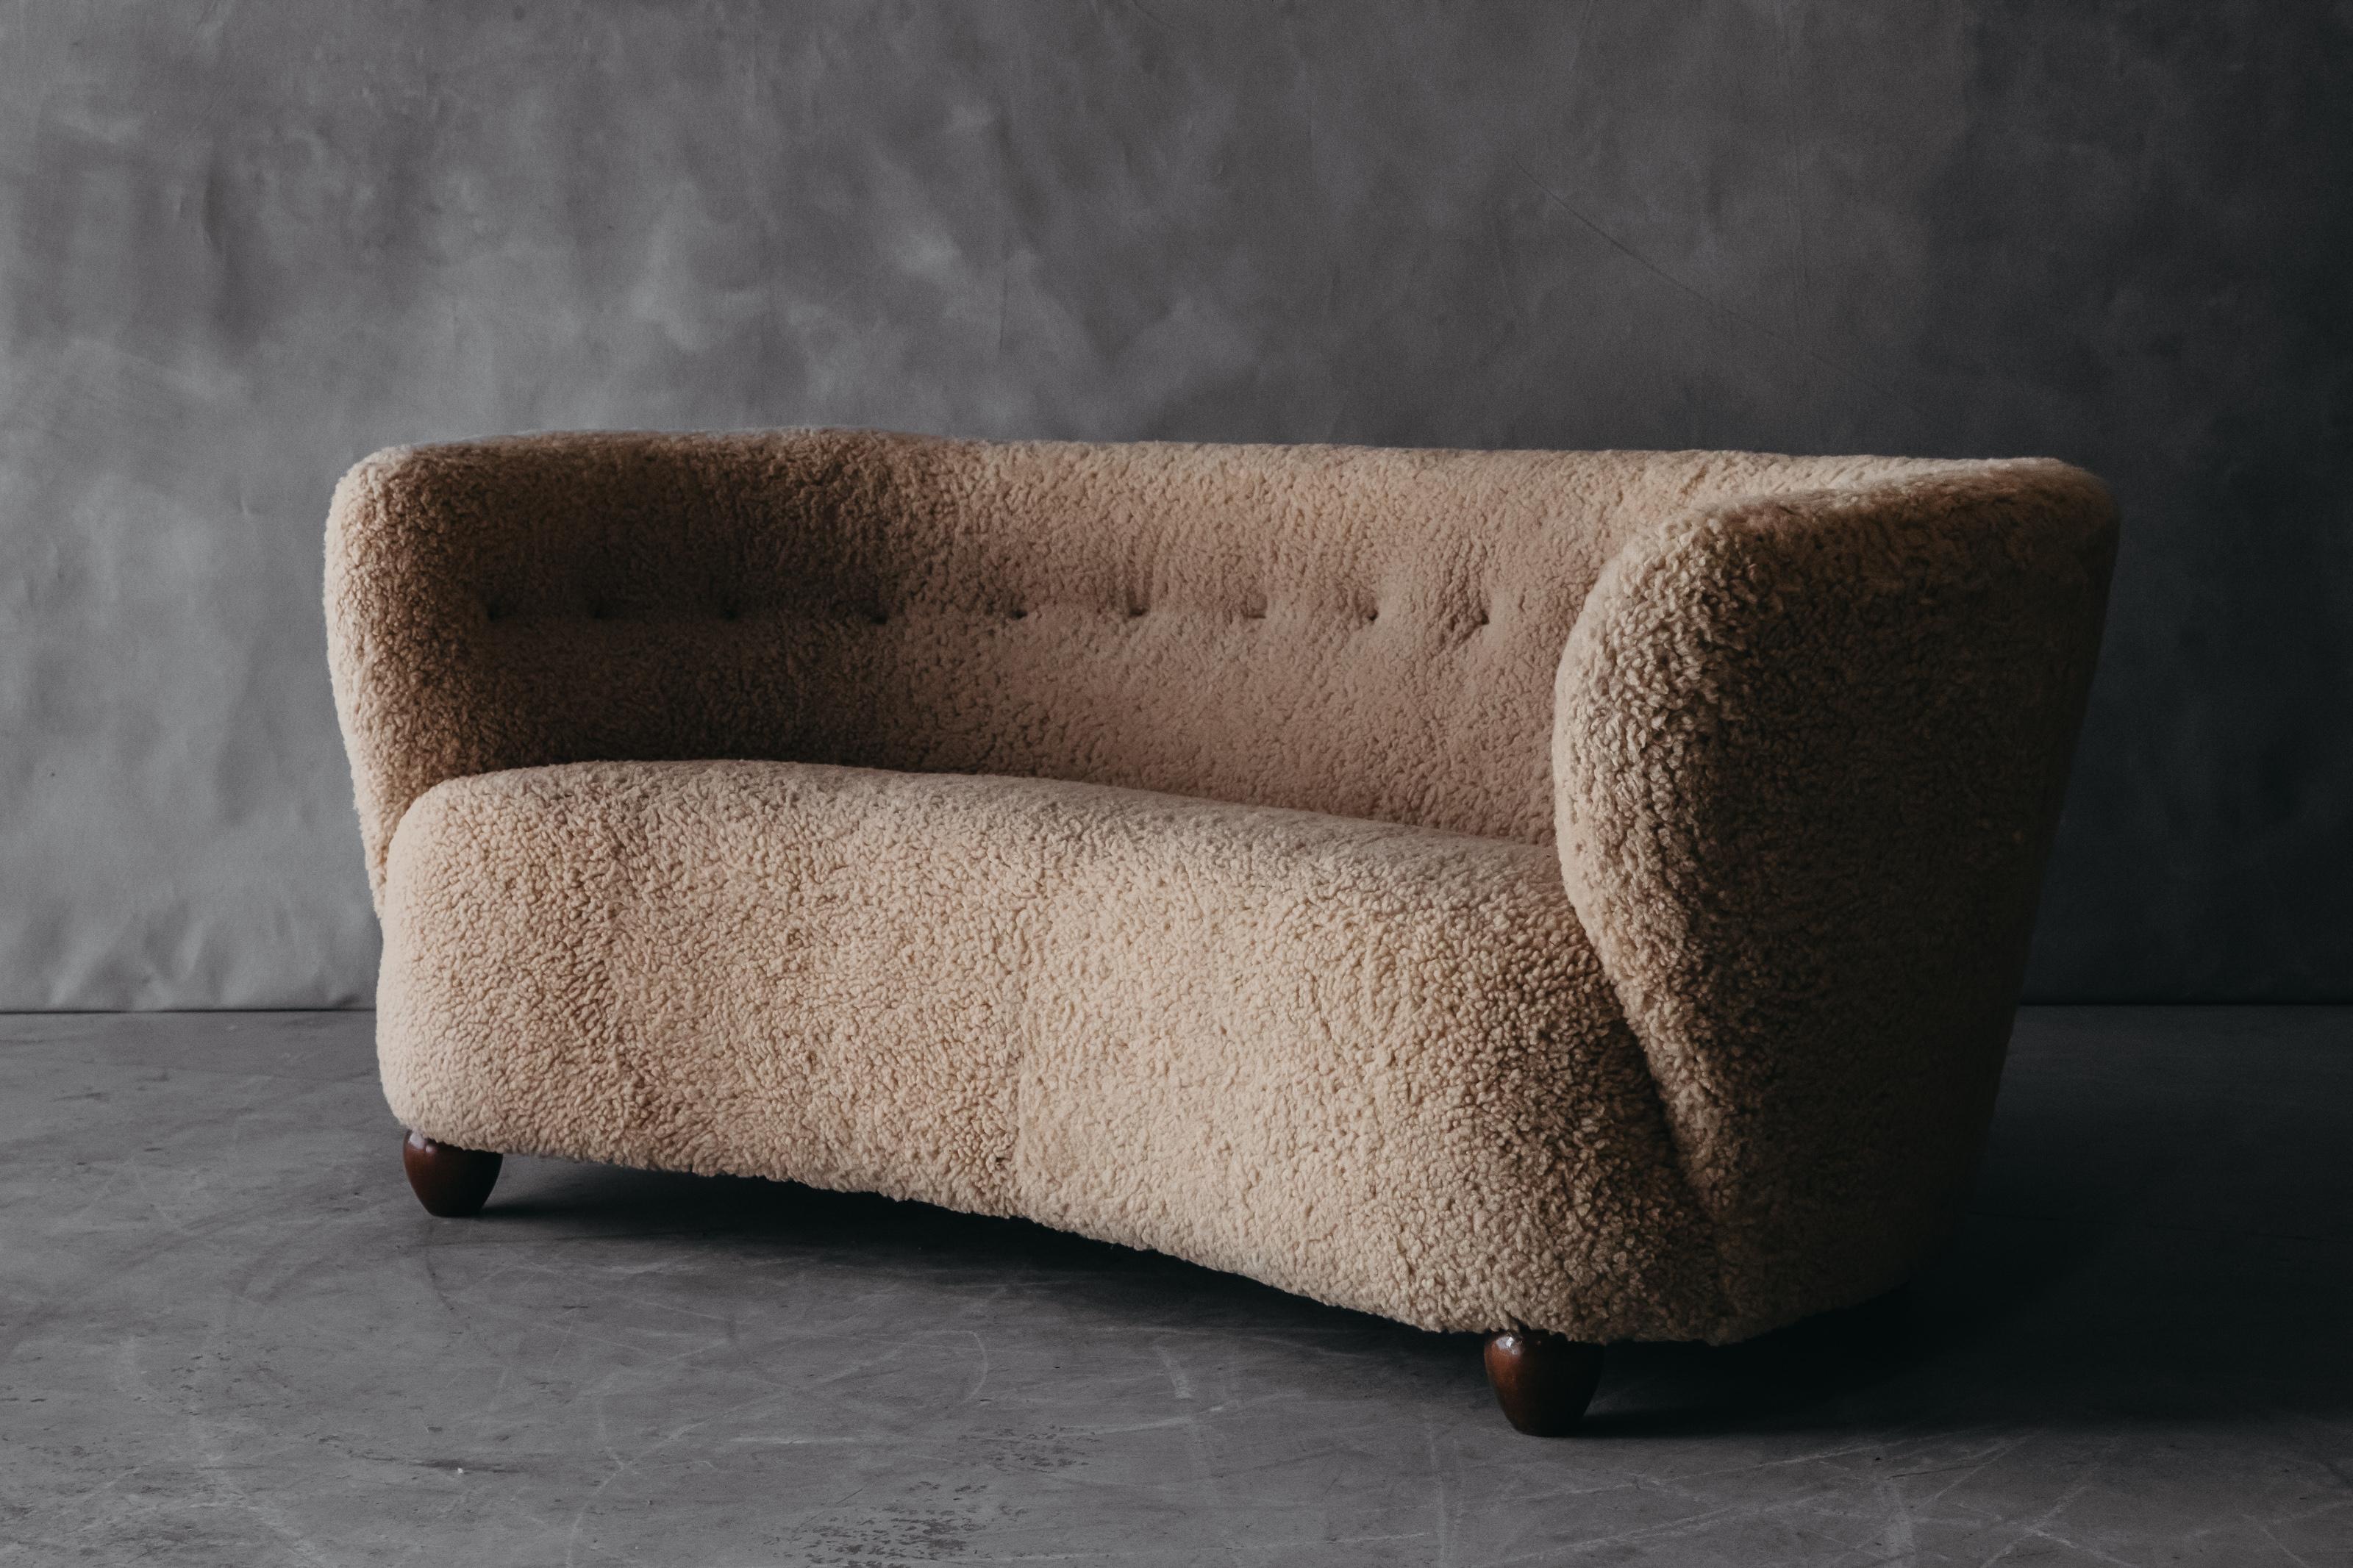 Vintage cabinetmaker sheepskin sofa from Denmark, Circa 1950. Very comfortable model, later upholstered in premium shearling.

We don't have the time to write an extensive description on each of our pieces. We prefer to speak directly with our